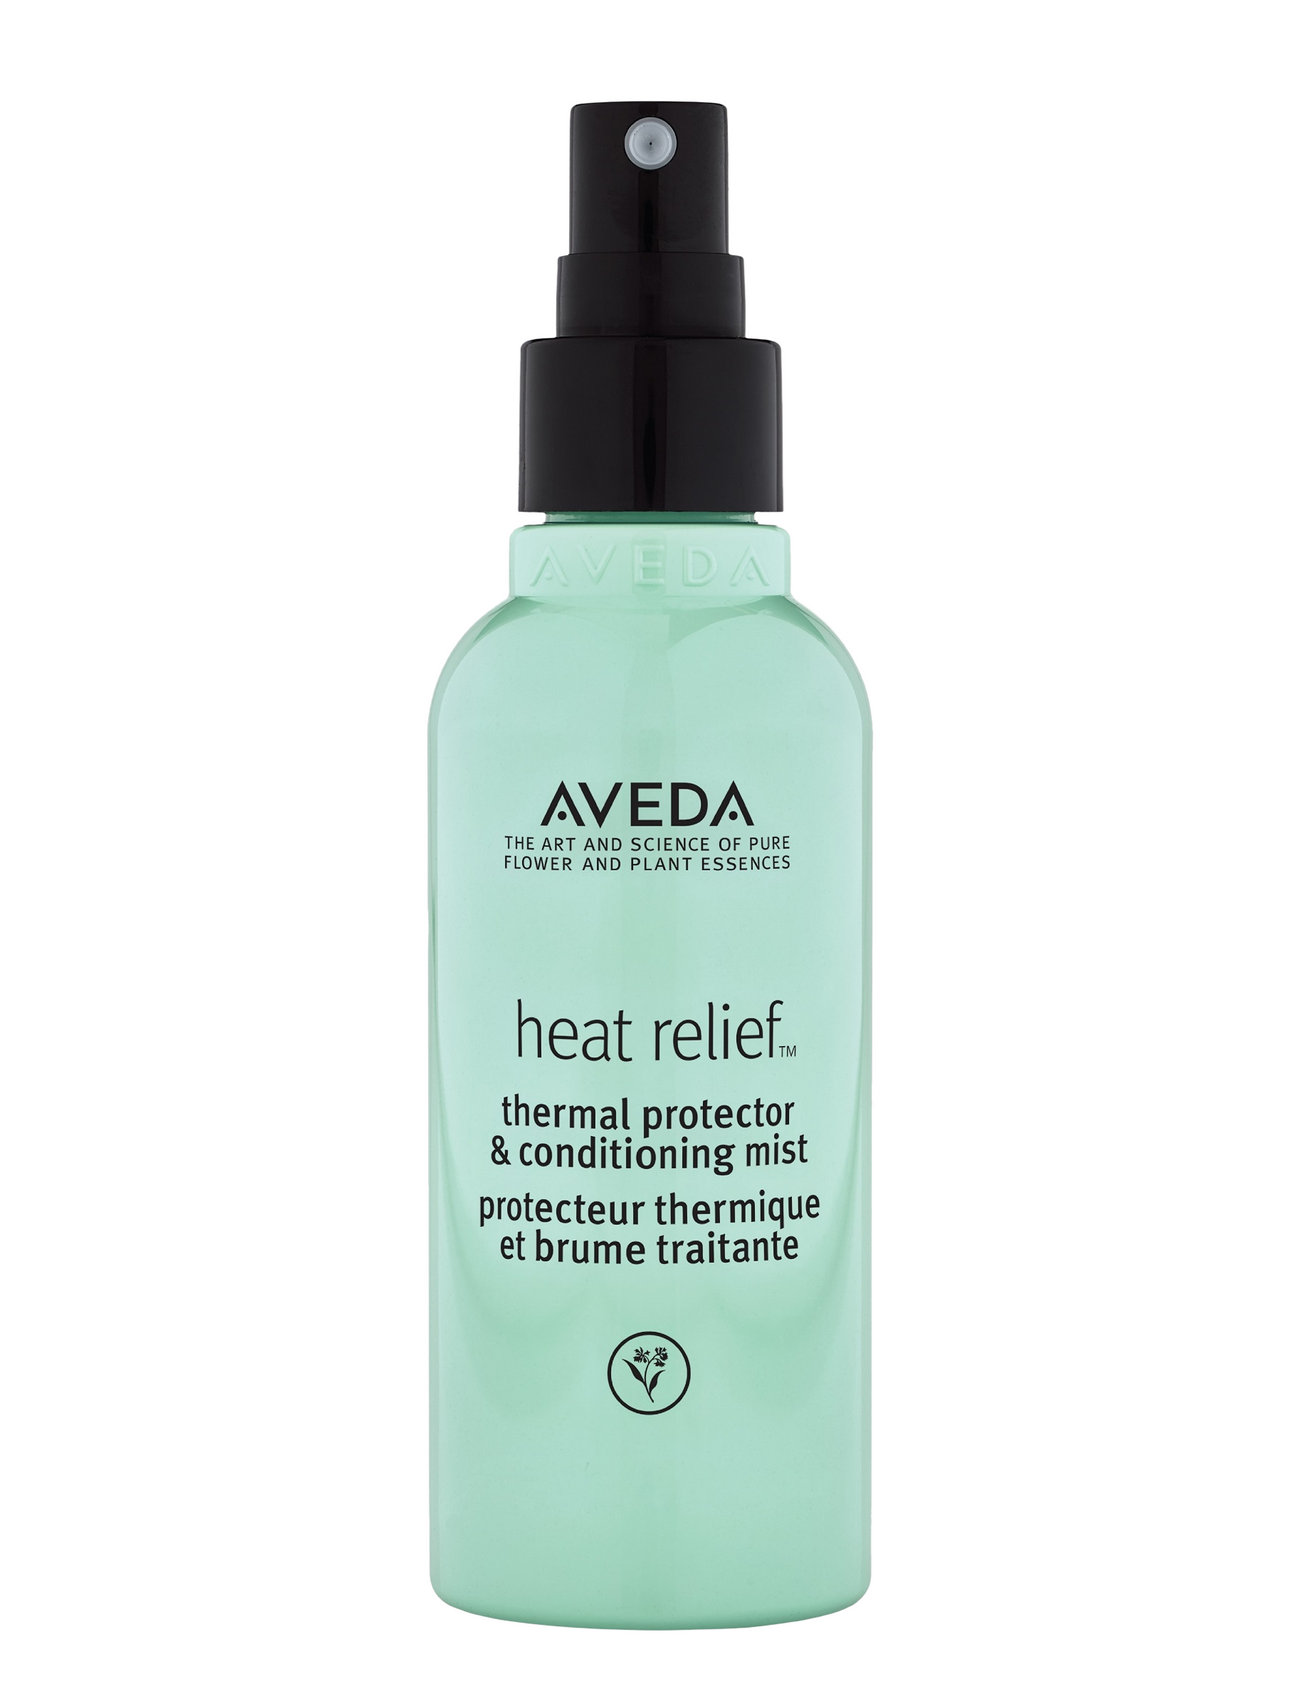 Heatrelief Thermal Protector & Conditiong Mist Beauty Women Hair Styling Hair Mists Nude Aveda